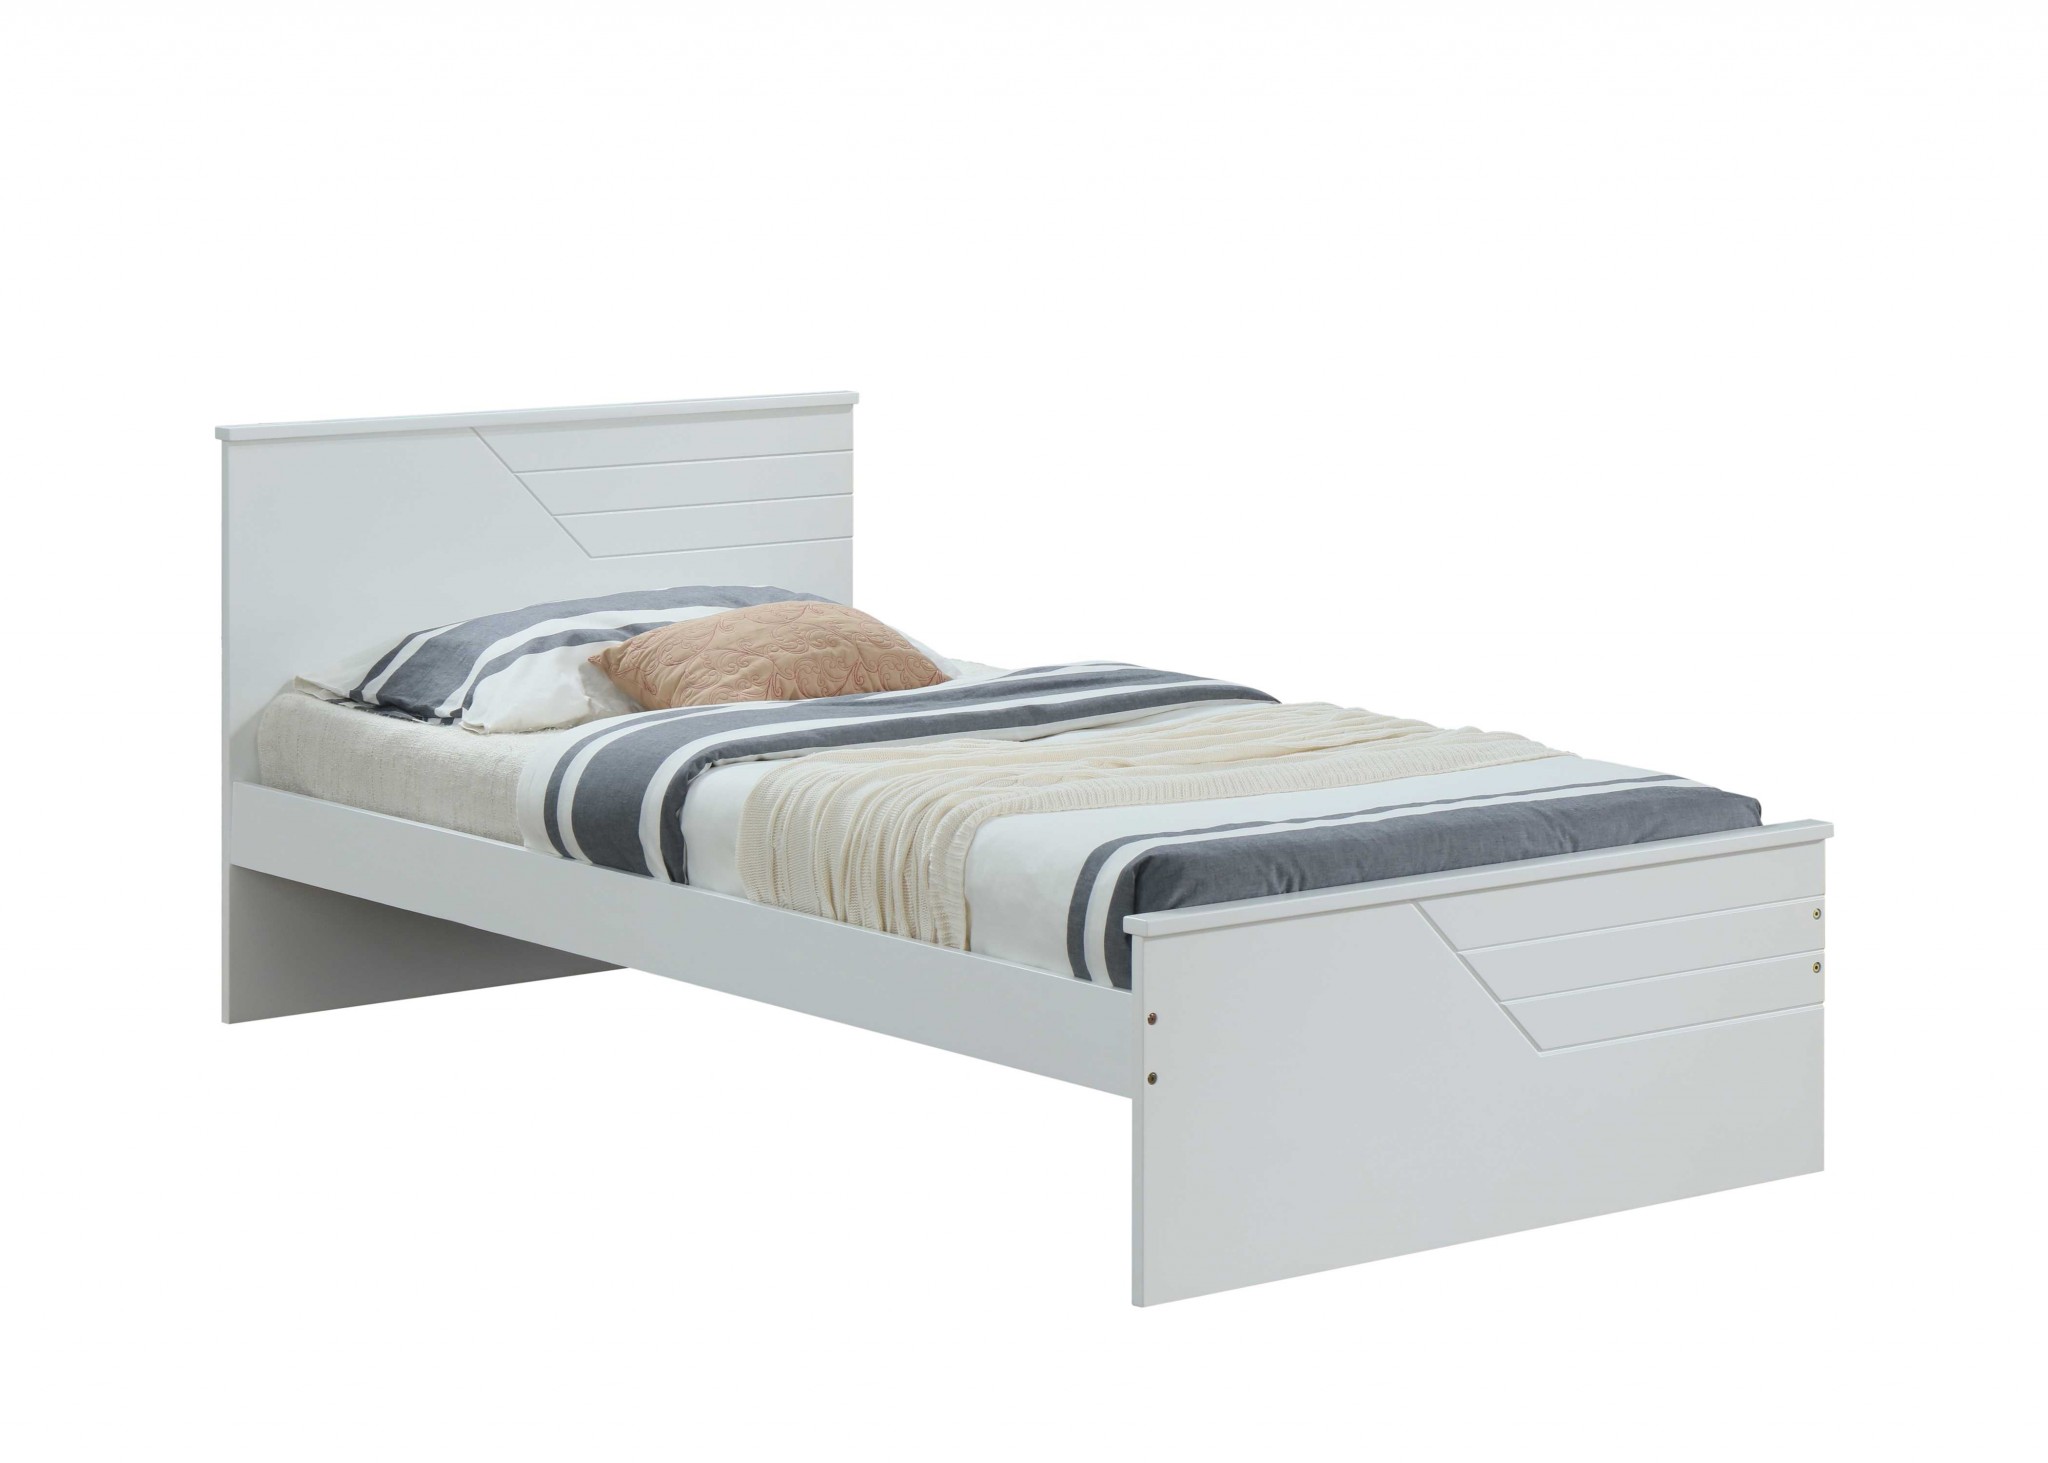 77" X 41" X 32" Twin White Solid Wood Bed